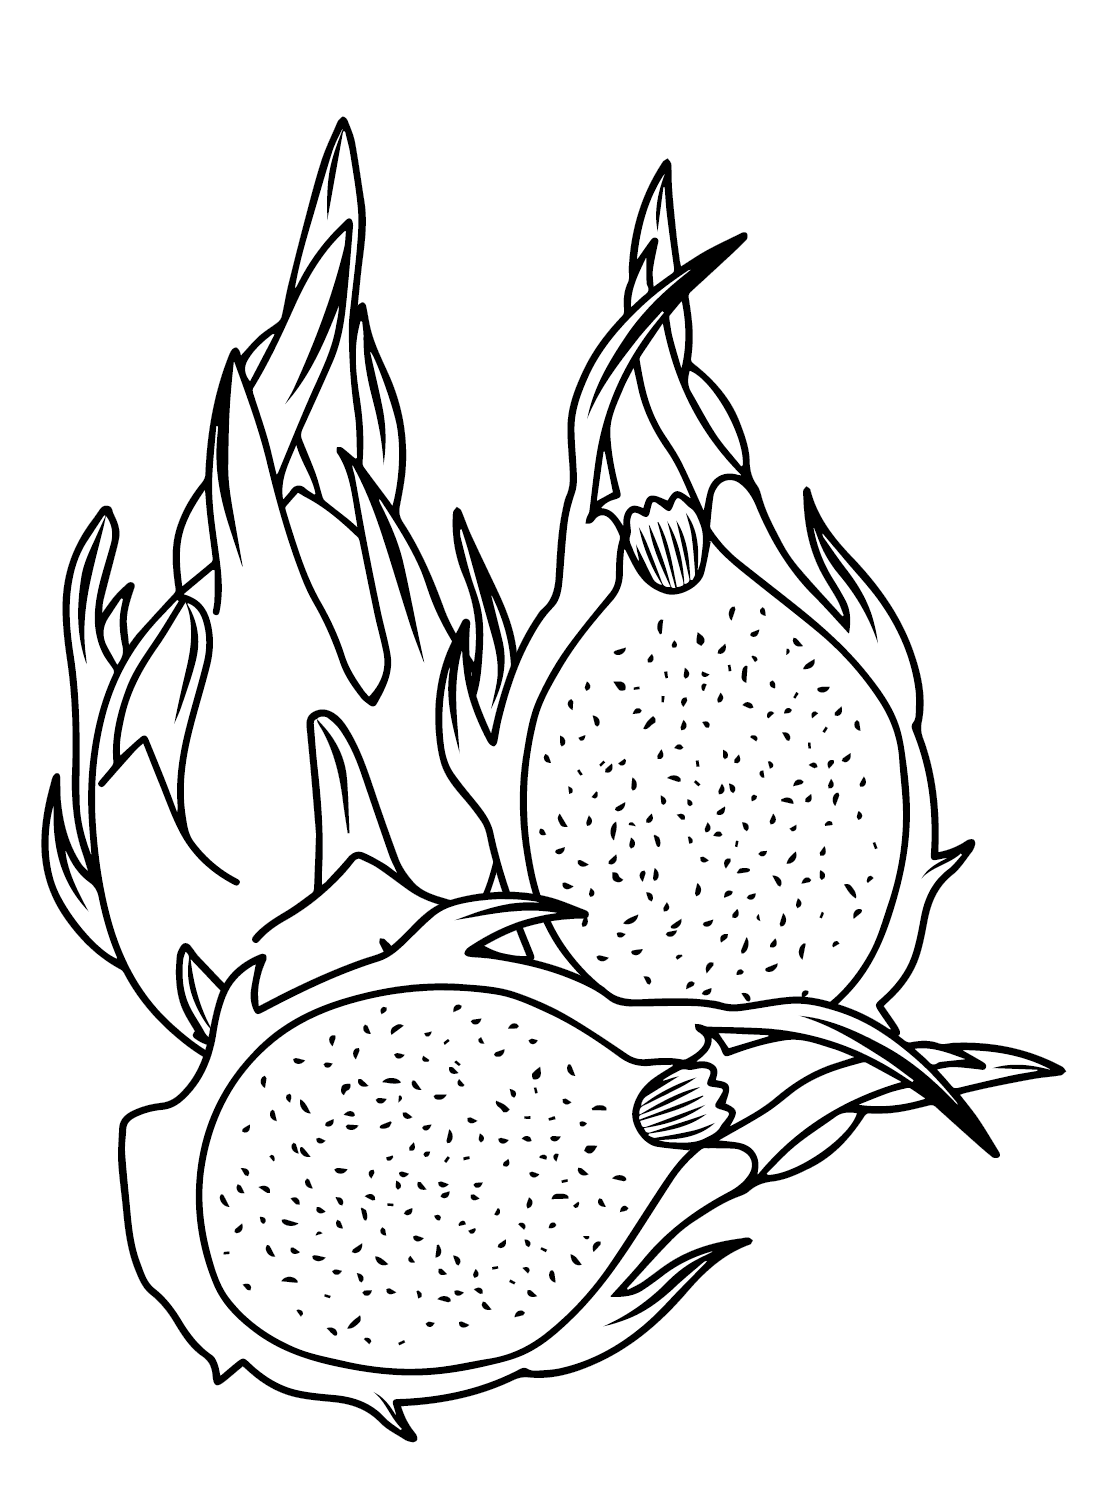 Drawing Dragon Fruit Coloring Page